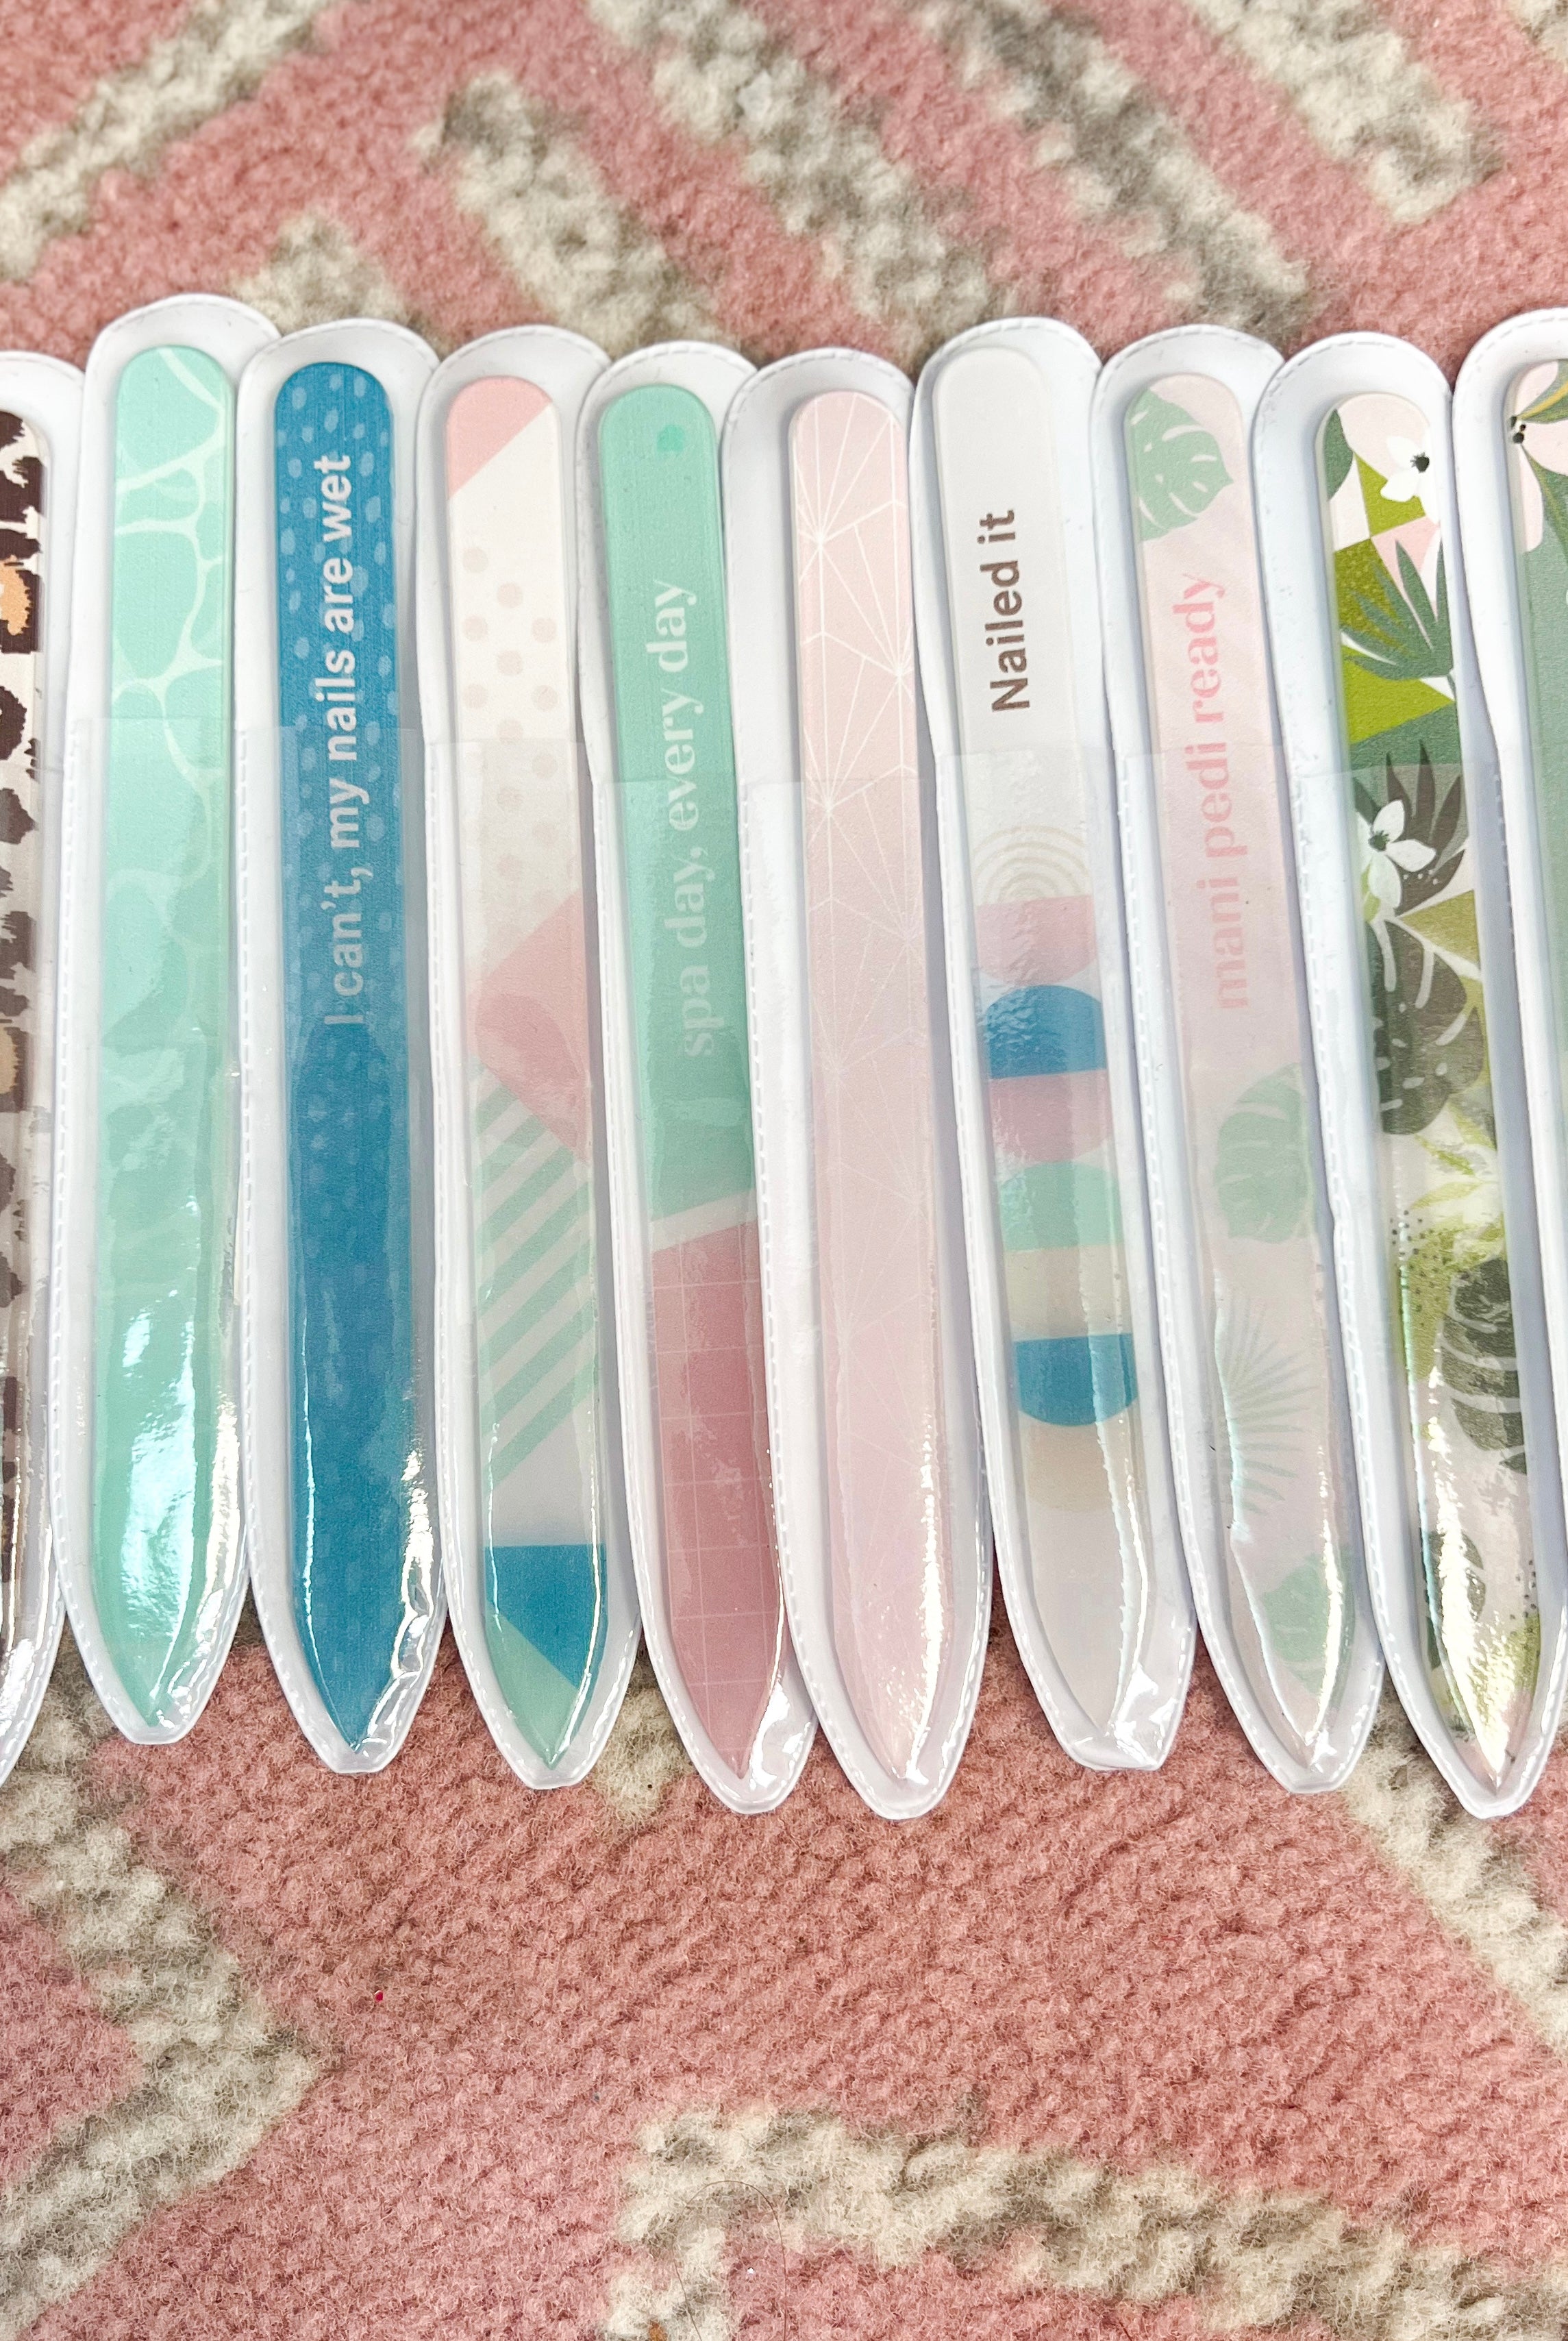 Better Shape Up Glass Nail File-340 Beauty/Self Care-The Lovely Closet-The Lovely Closet, Women's Fashion Boutique in Alexandria, KY